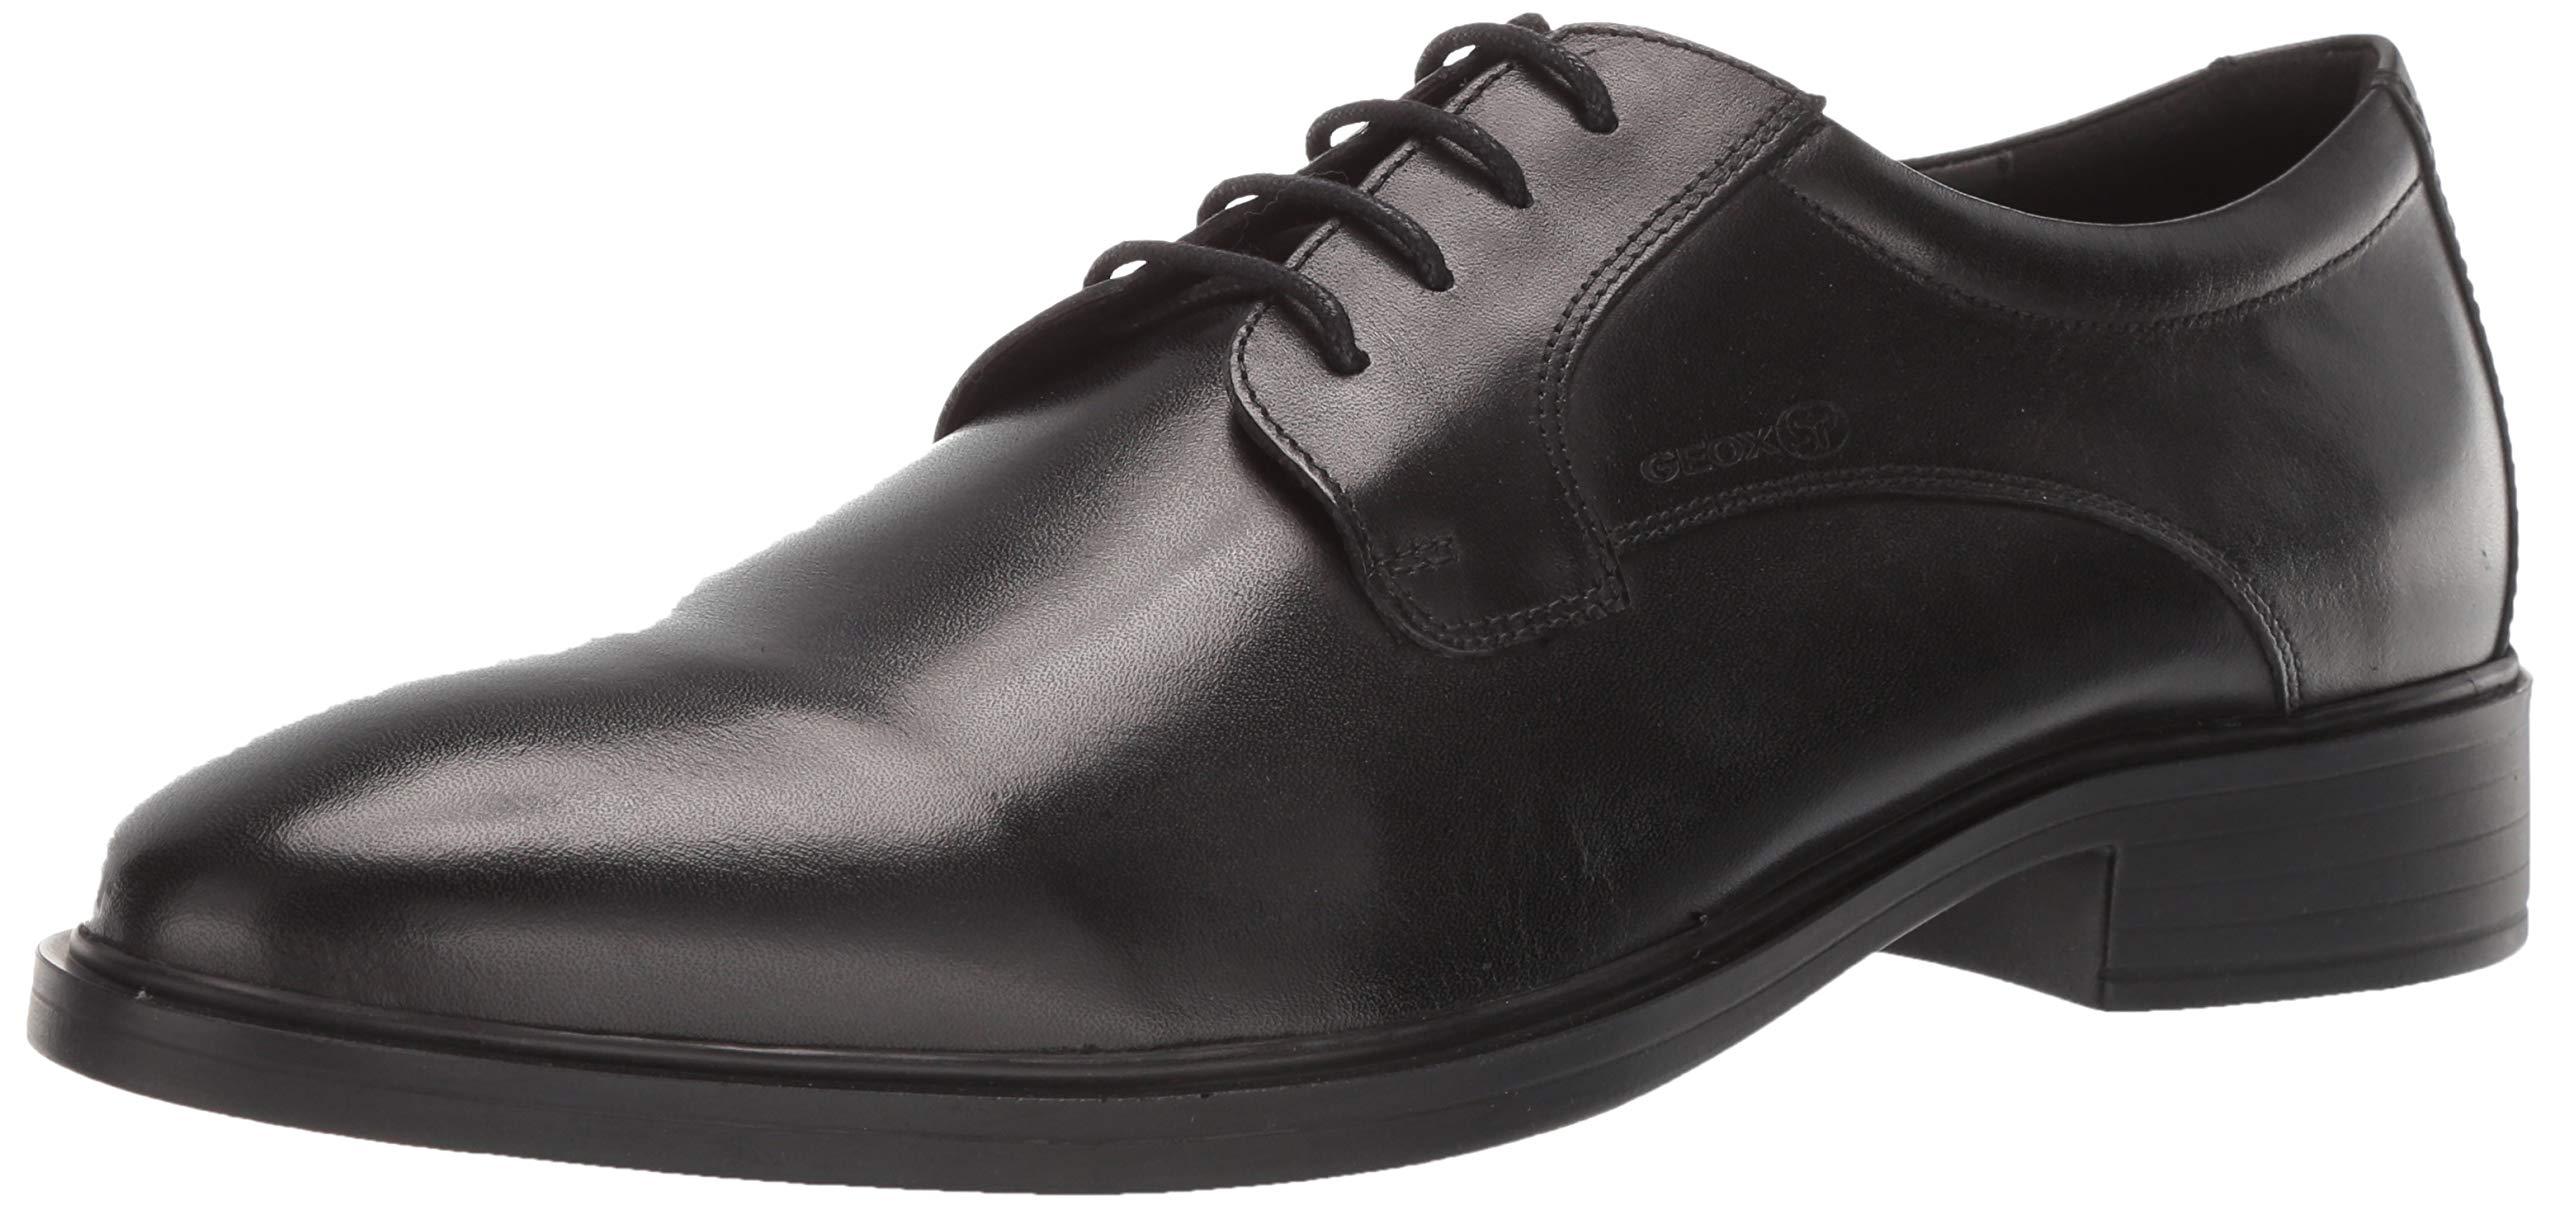 Geox Gladwin 1 Dress Shoe Oxford in Black for Men - Save 31% - Lyst